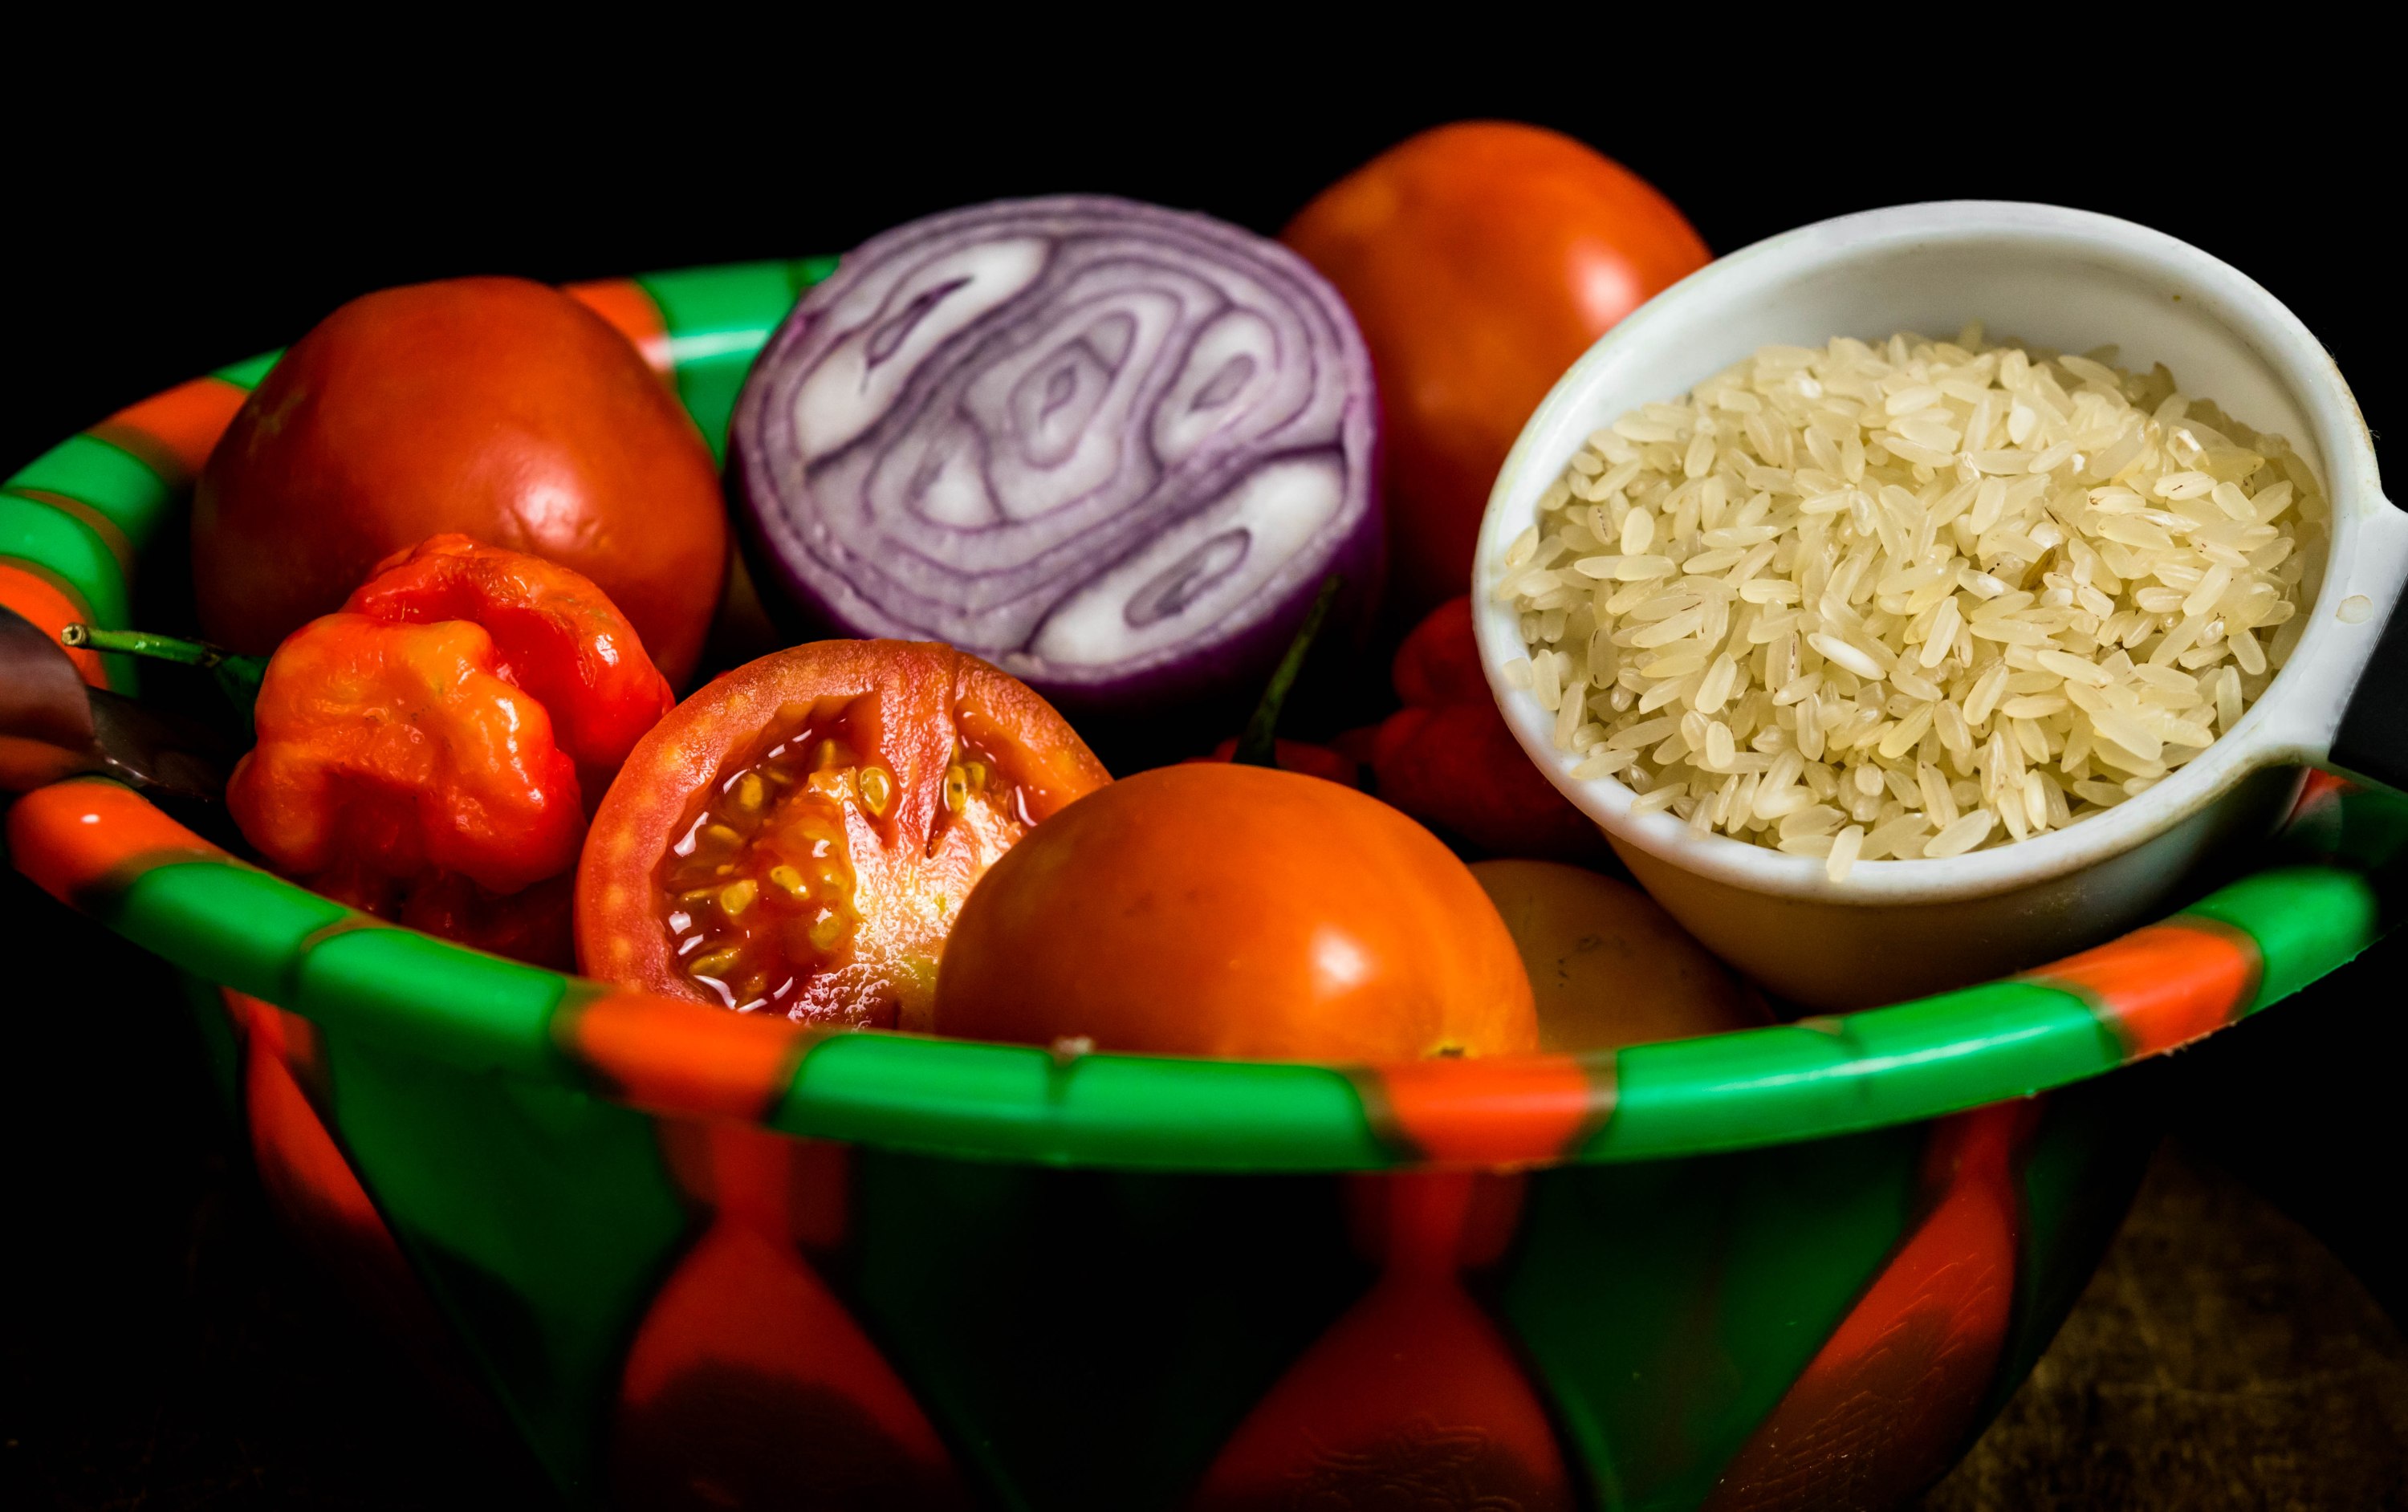 Rice, Sliced tomato and sliced onion, Scottish bonnet peppers in green and red plastic bowl for Nigerian stew concept isolated on black background